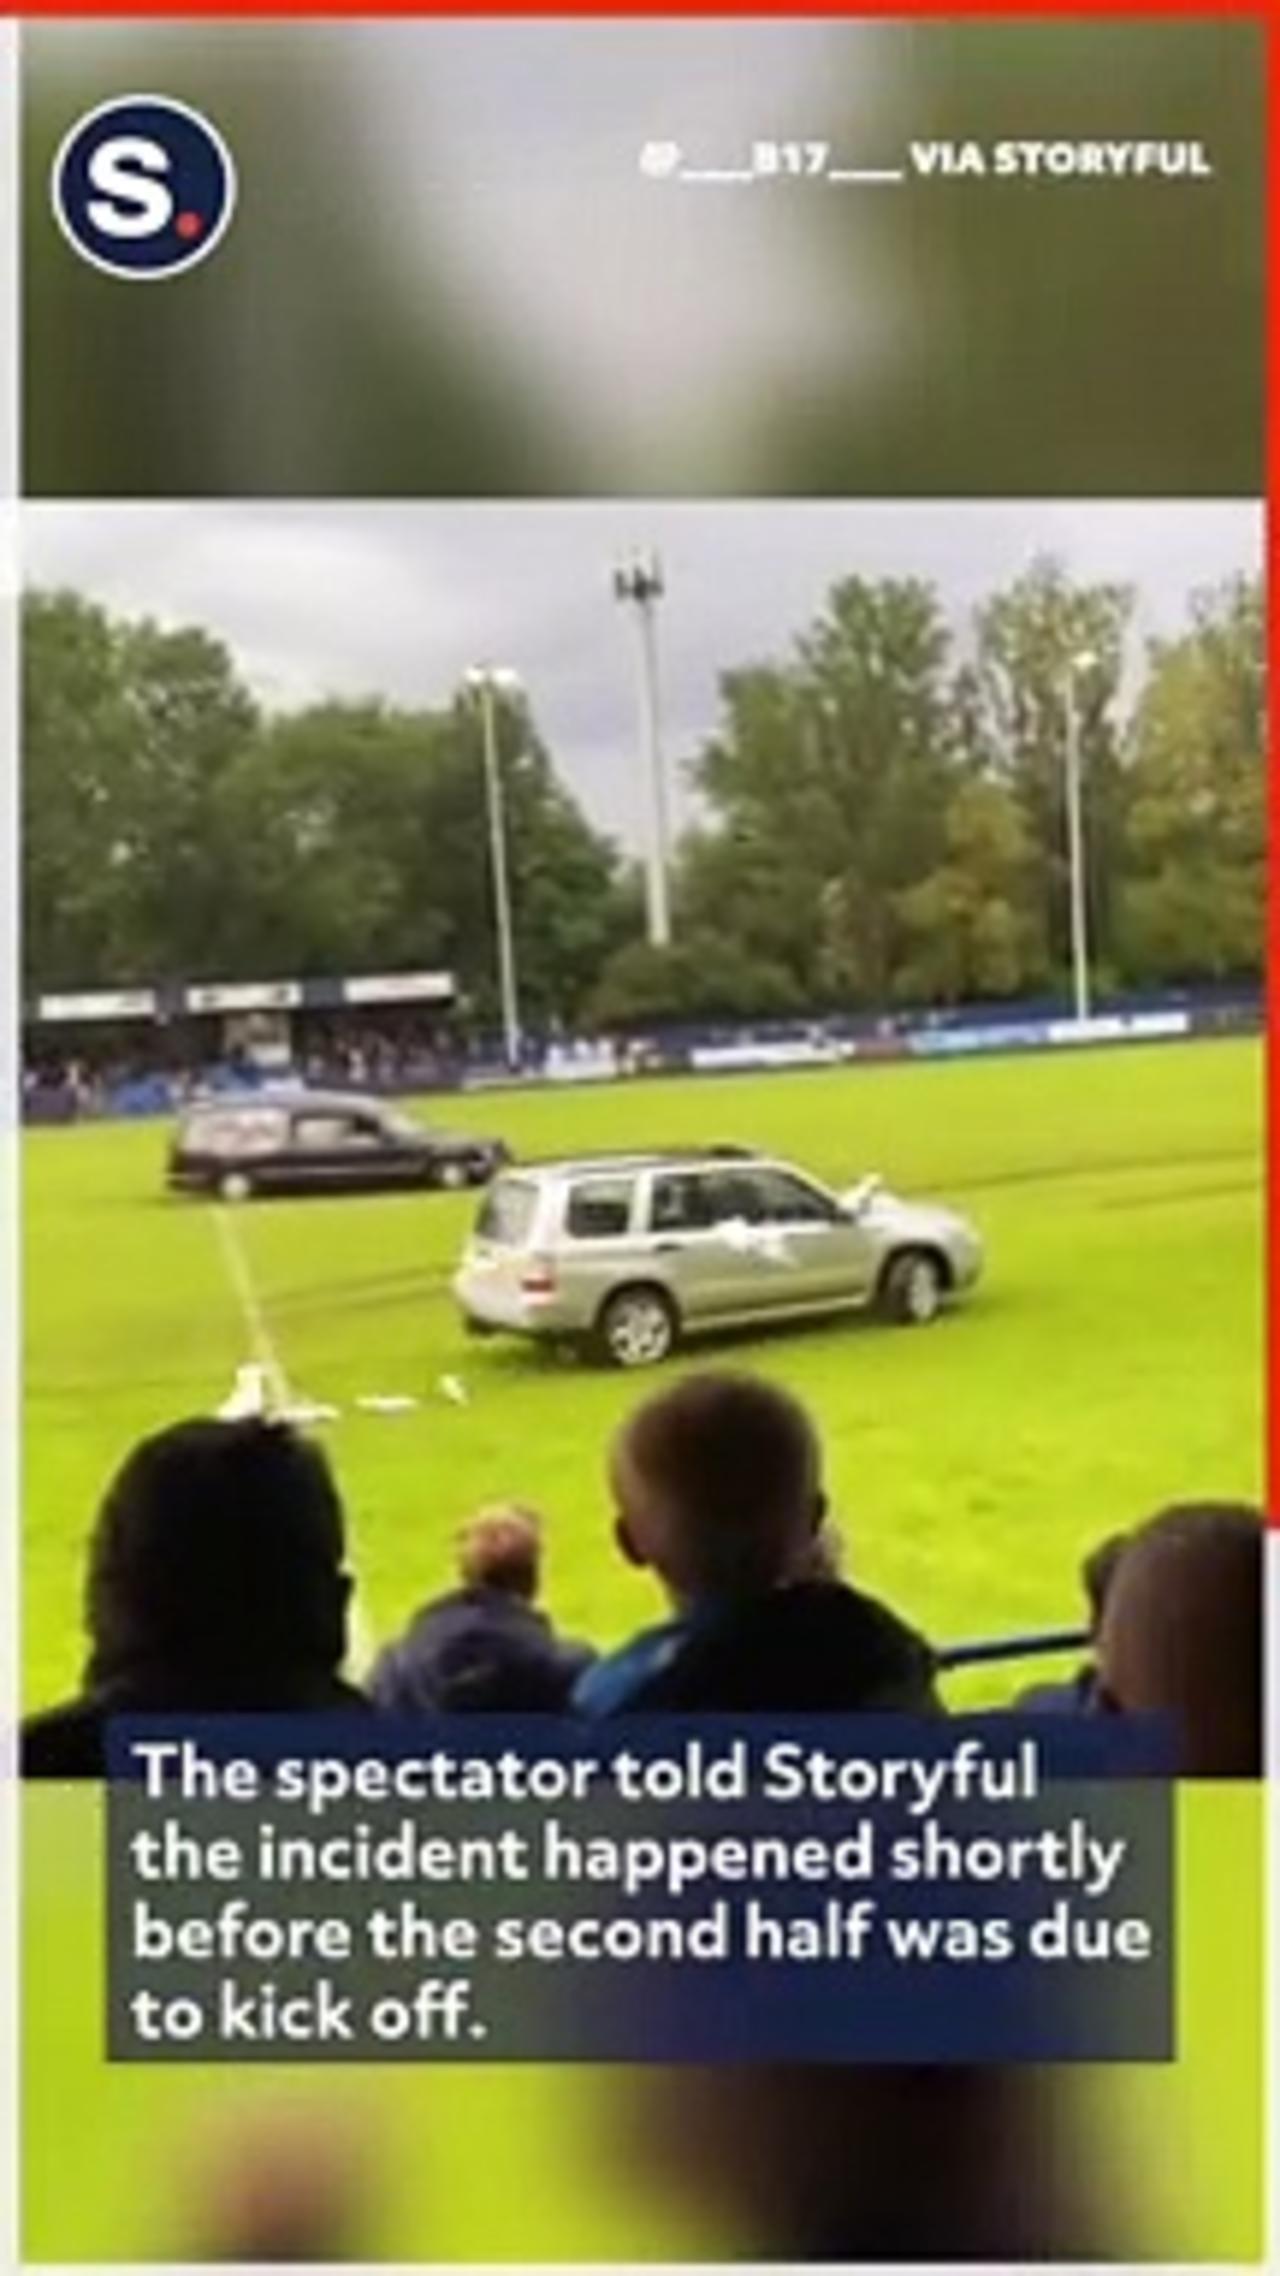 Soccer Game Abandoned in England After Hearse Driven Onto Pitch